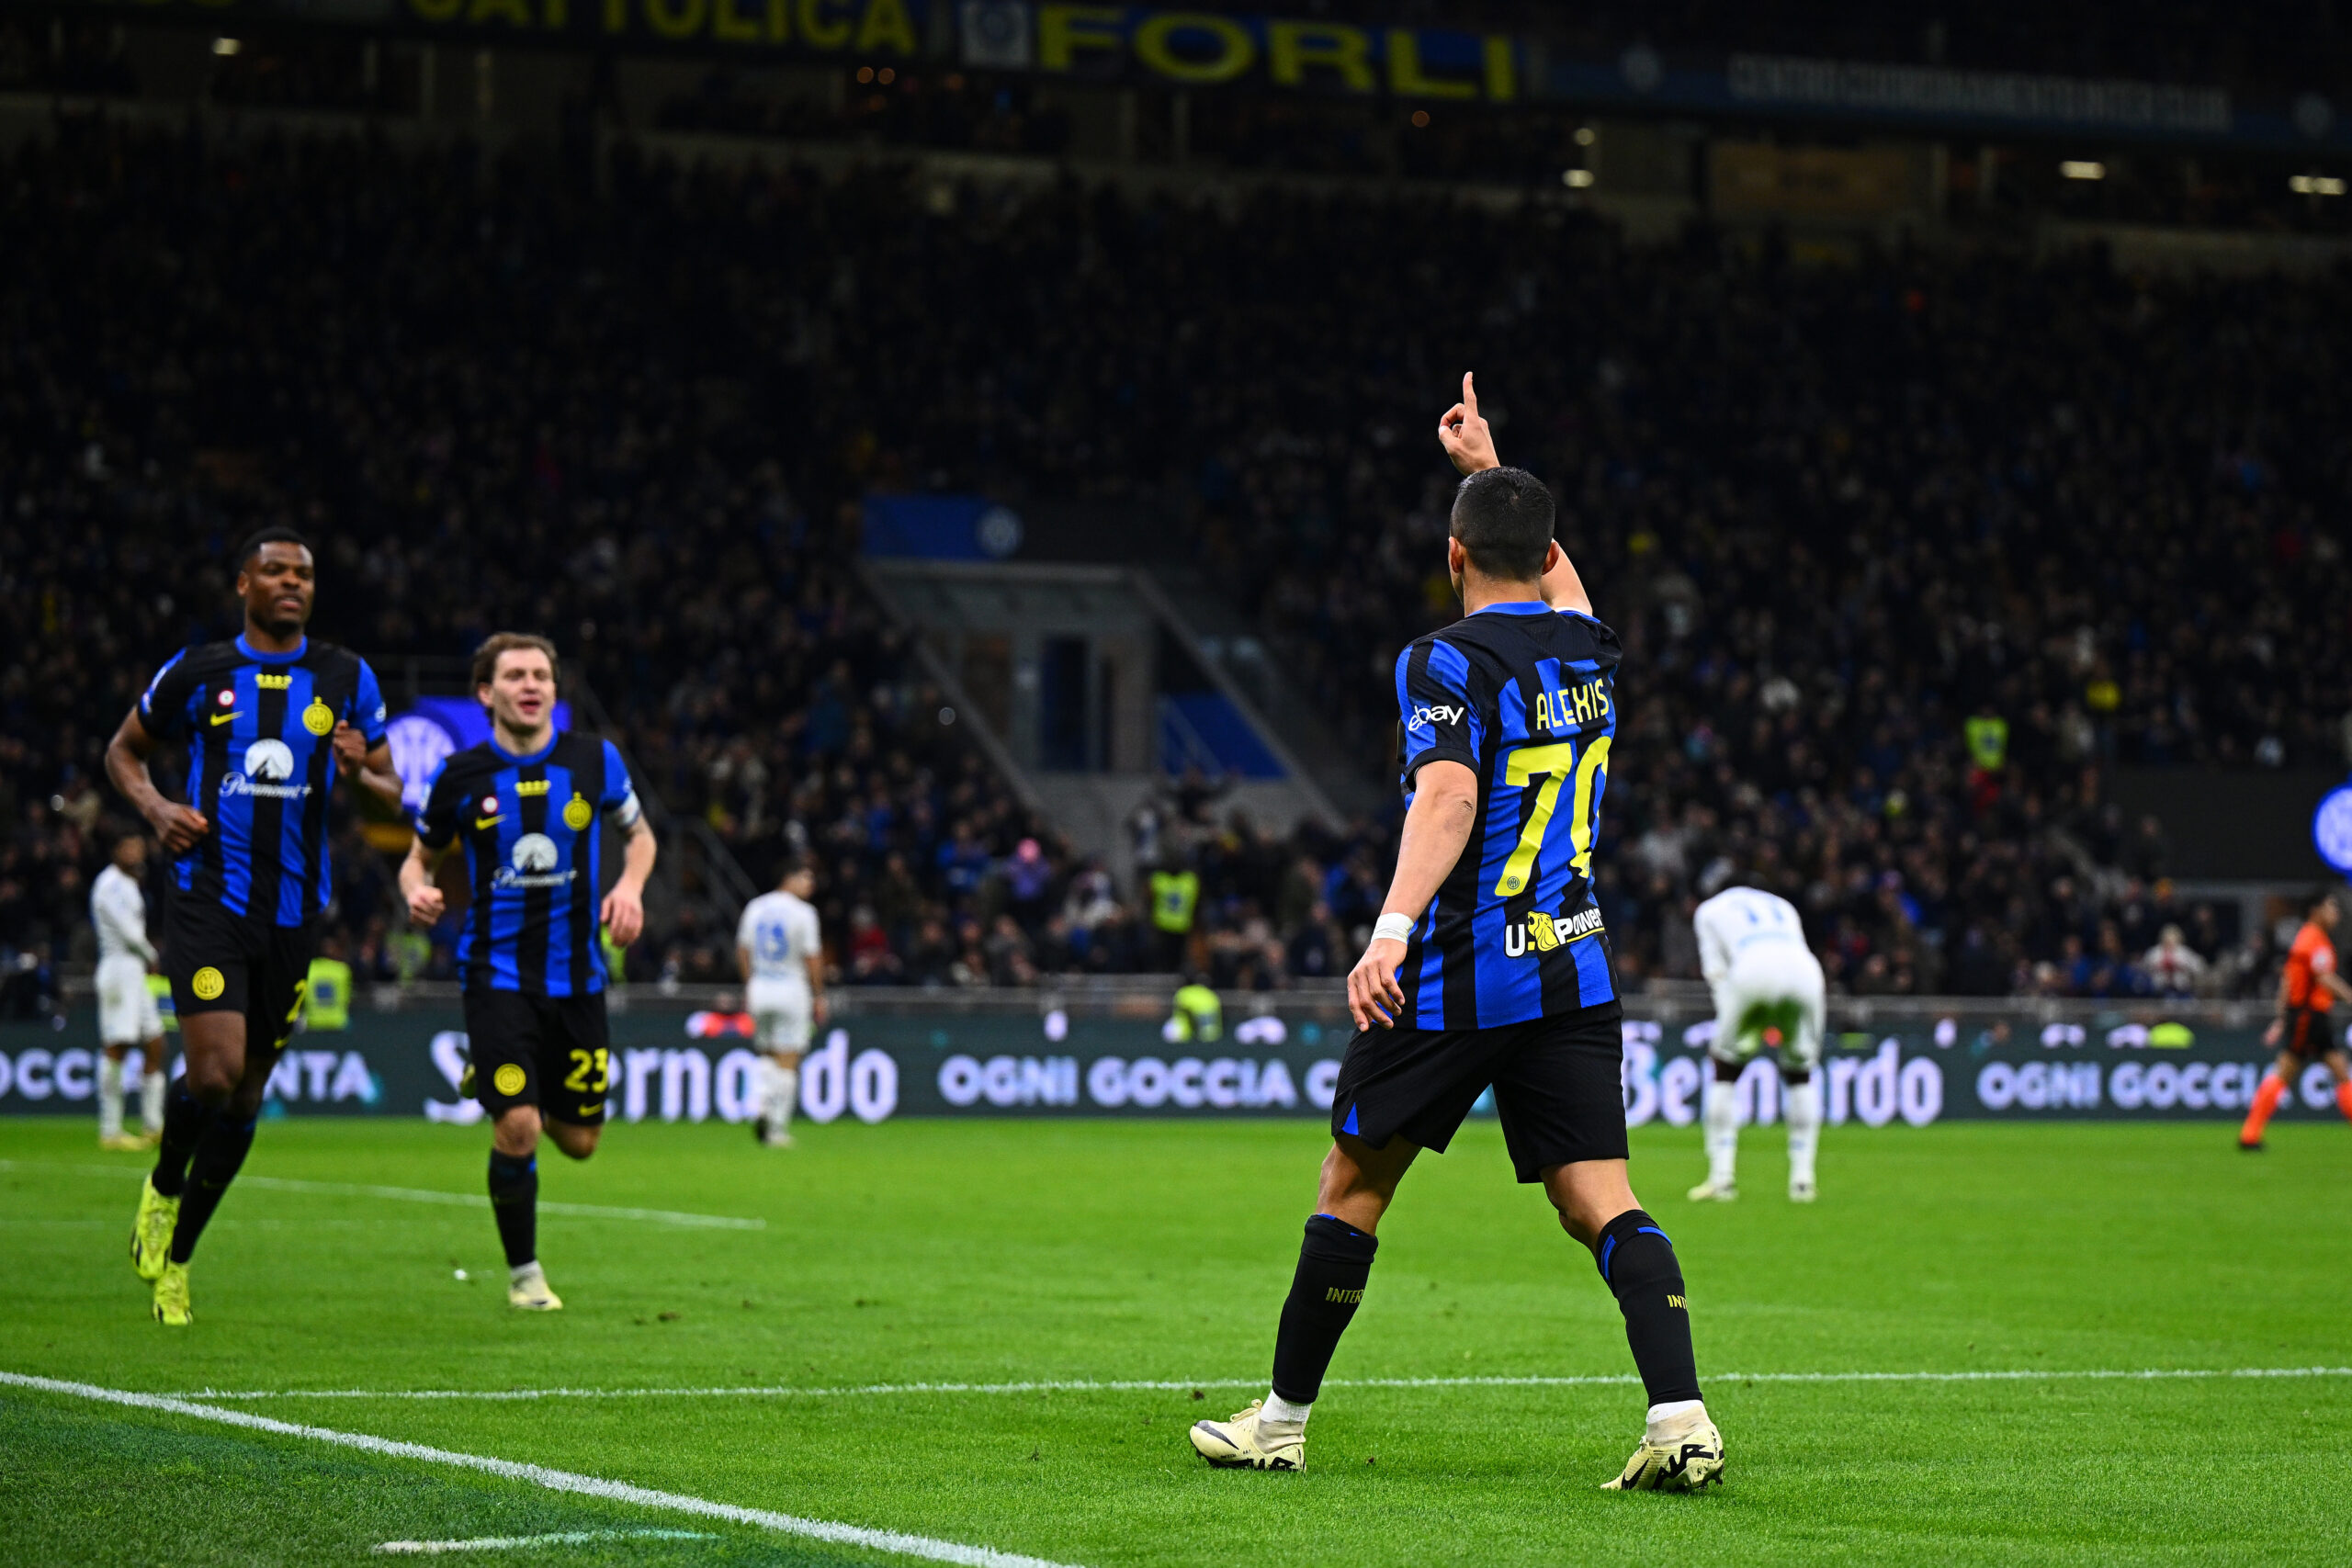 Inter quickly returned to winning ways against Empoli after the stumble against Napoli. They are now 11 points away from clinching their 20th Scudetto.